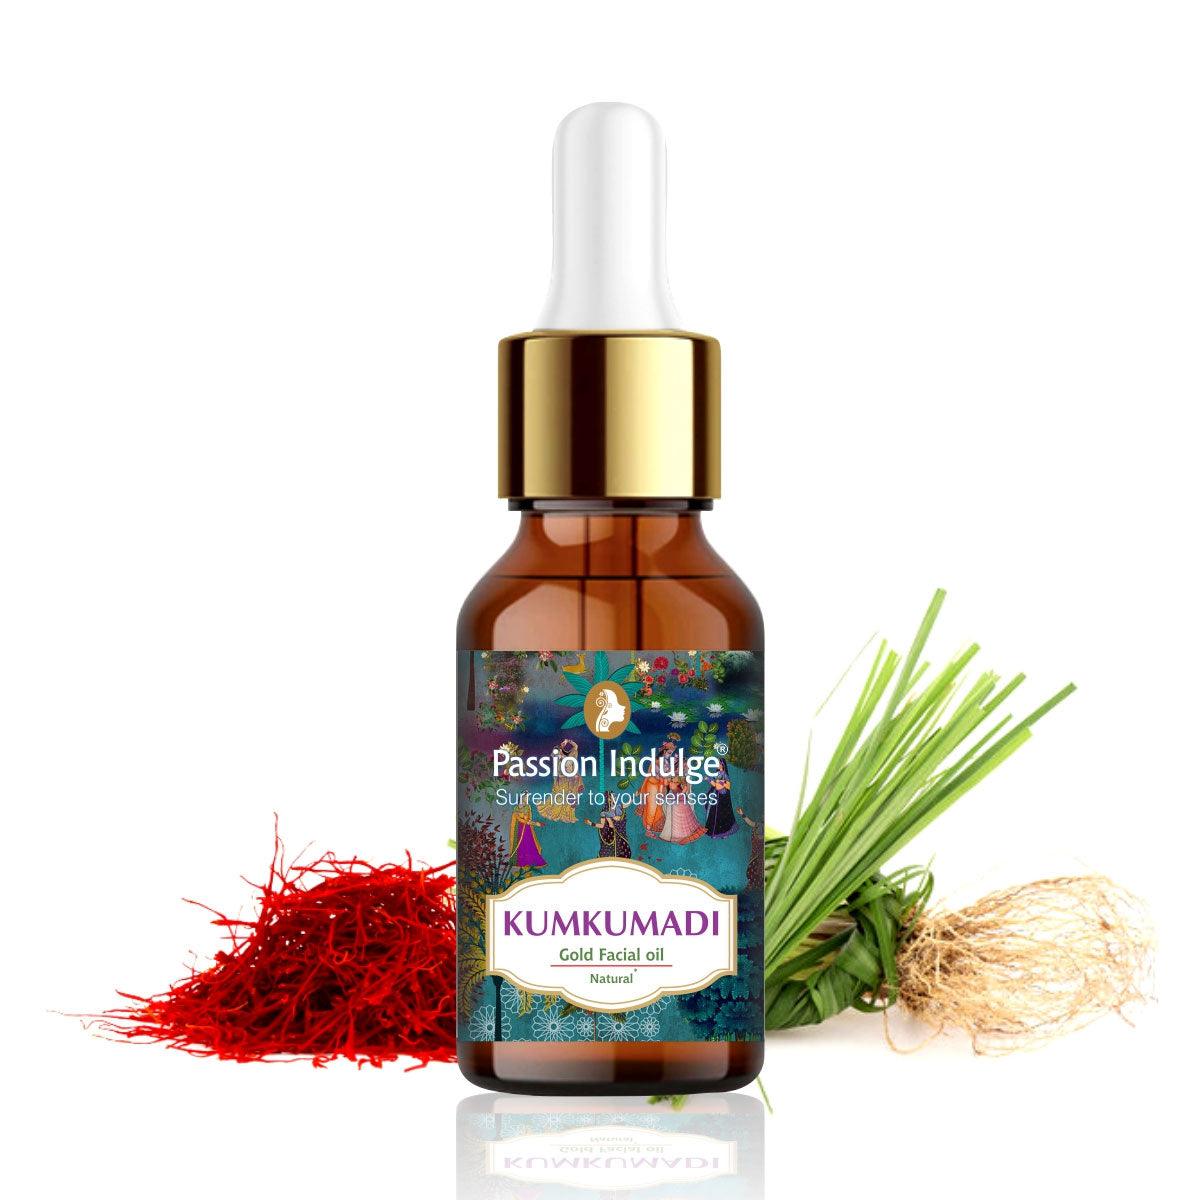 Kumkumadi Pure & Natural Miracle Facial Oil 10ml For Glowing Skin with Saffron, Vetiver & 16 Herbs | Shine & Brightness | Anti Ageing | Anti Wrinkle | Reduces Dark Spots & Pigmentation for all Skin Type - passionindulge